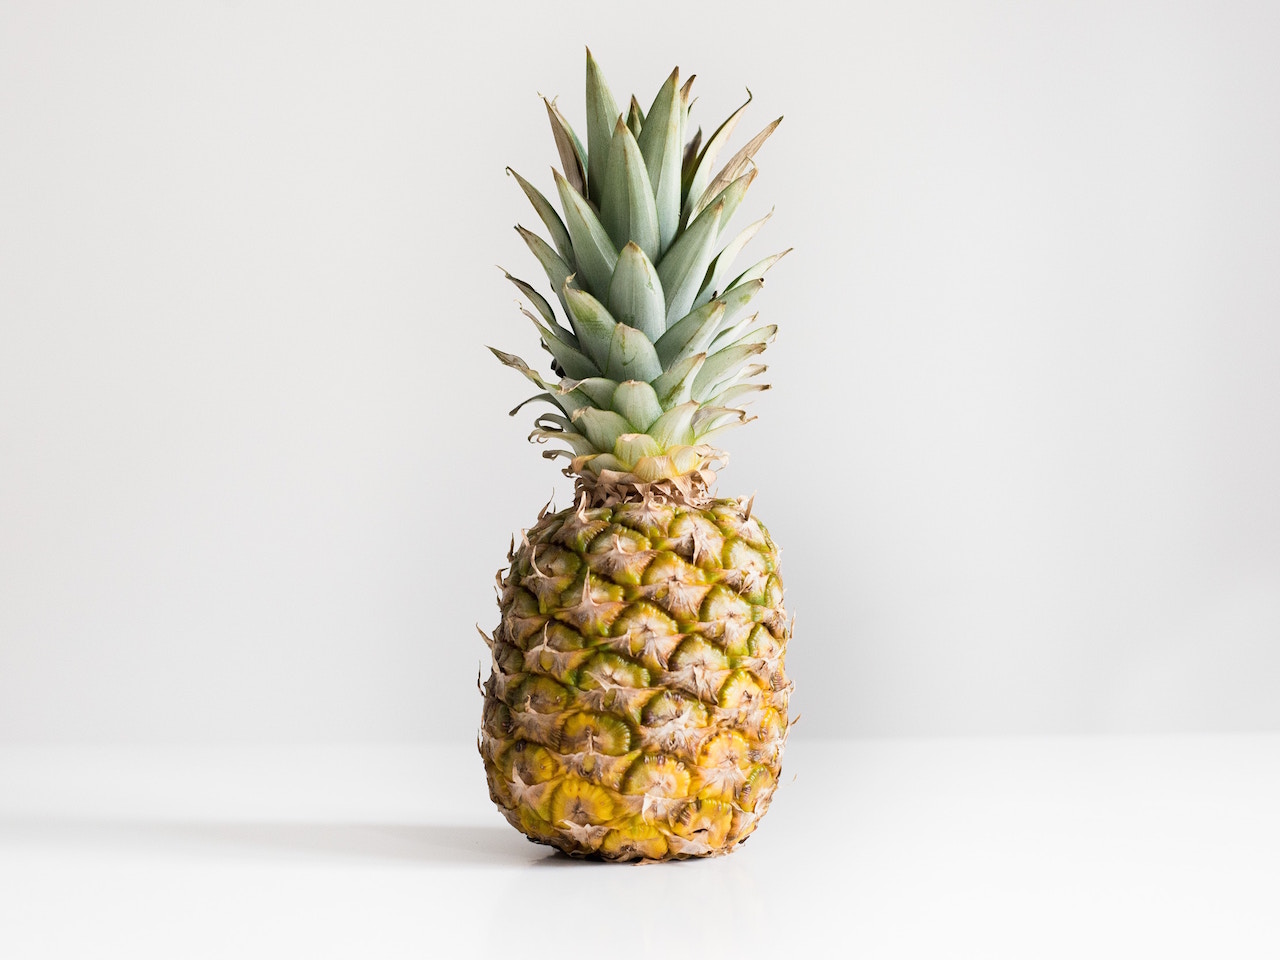 How to core a pineapple - photo by julien pianetti, unsplash